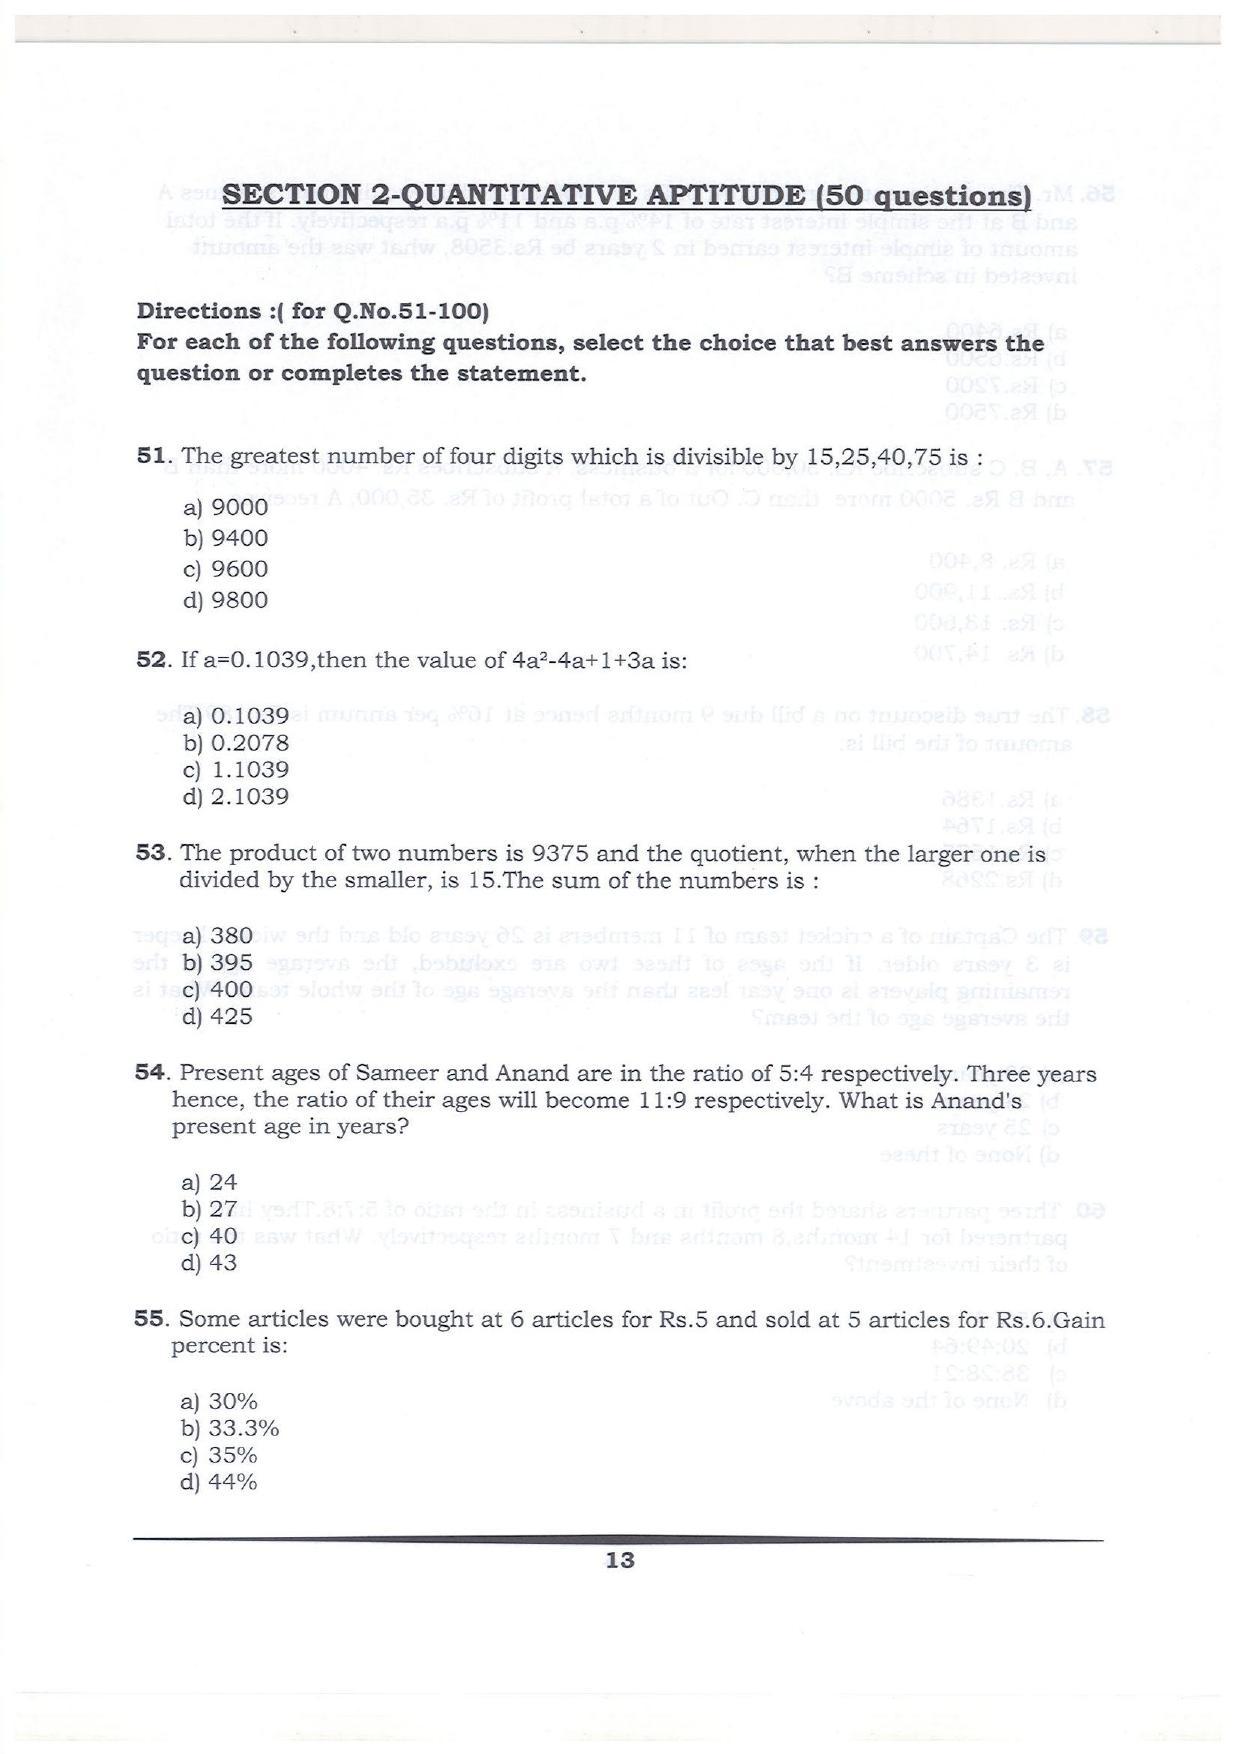 KMAT Question Papers - February 2018 - Page 12